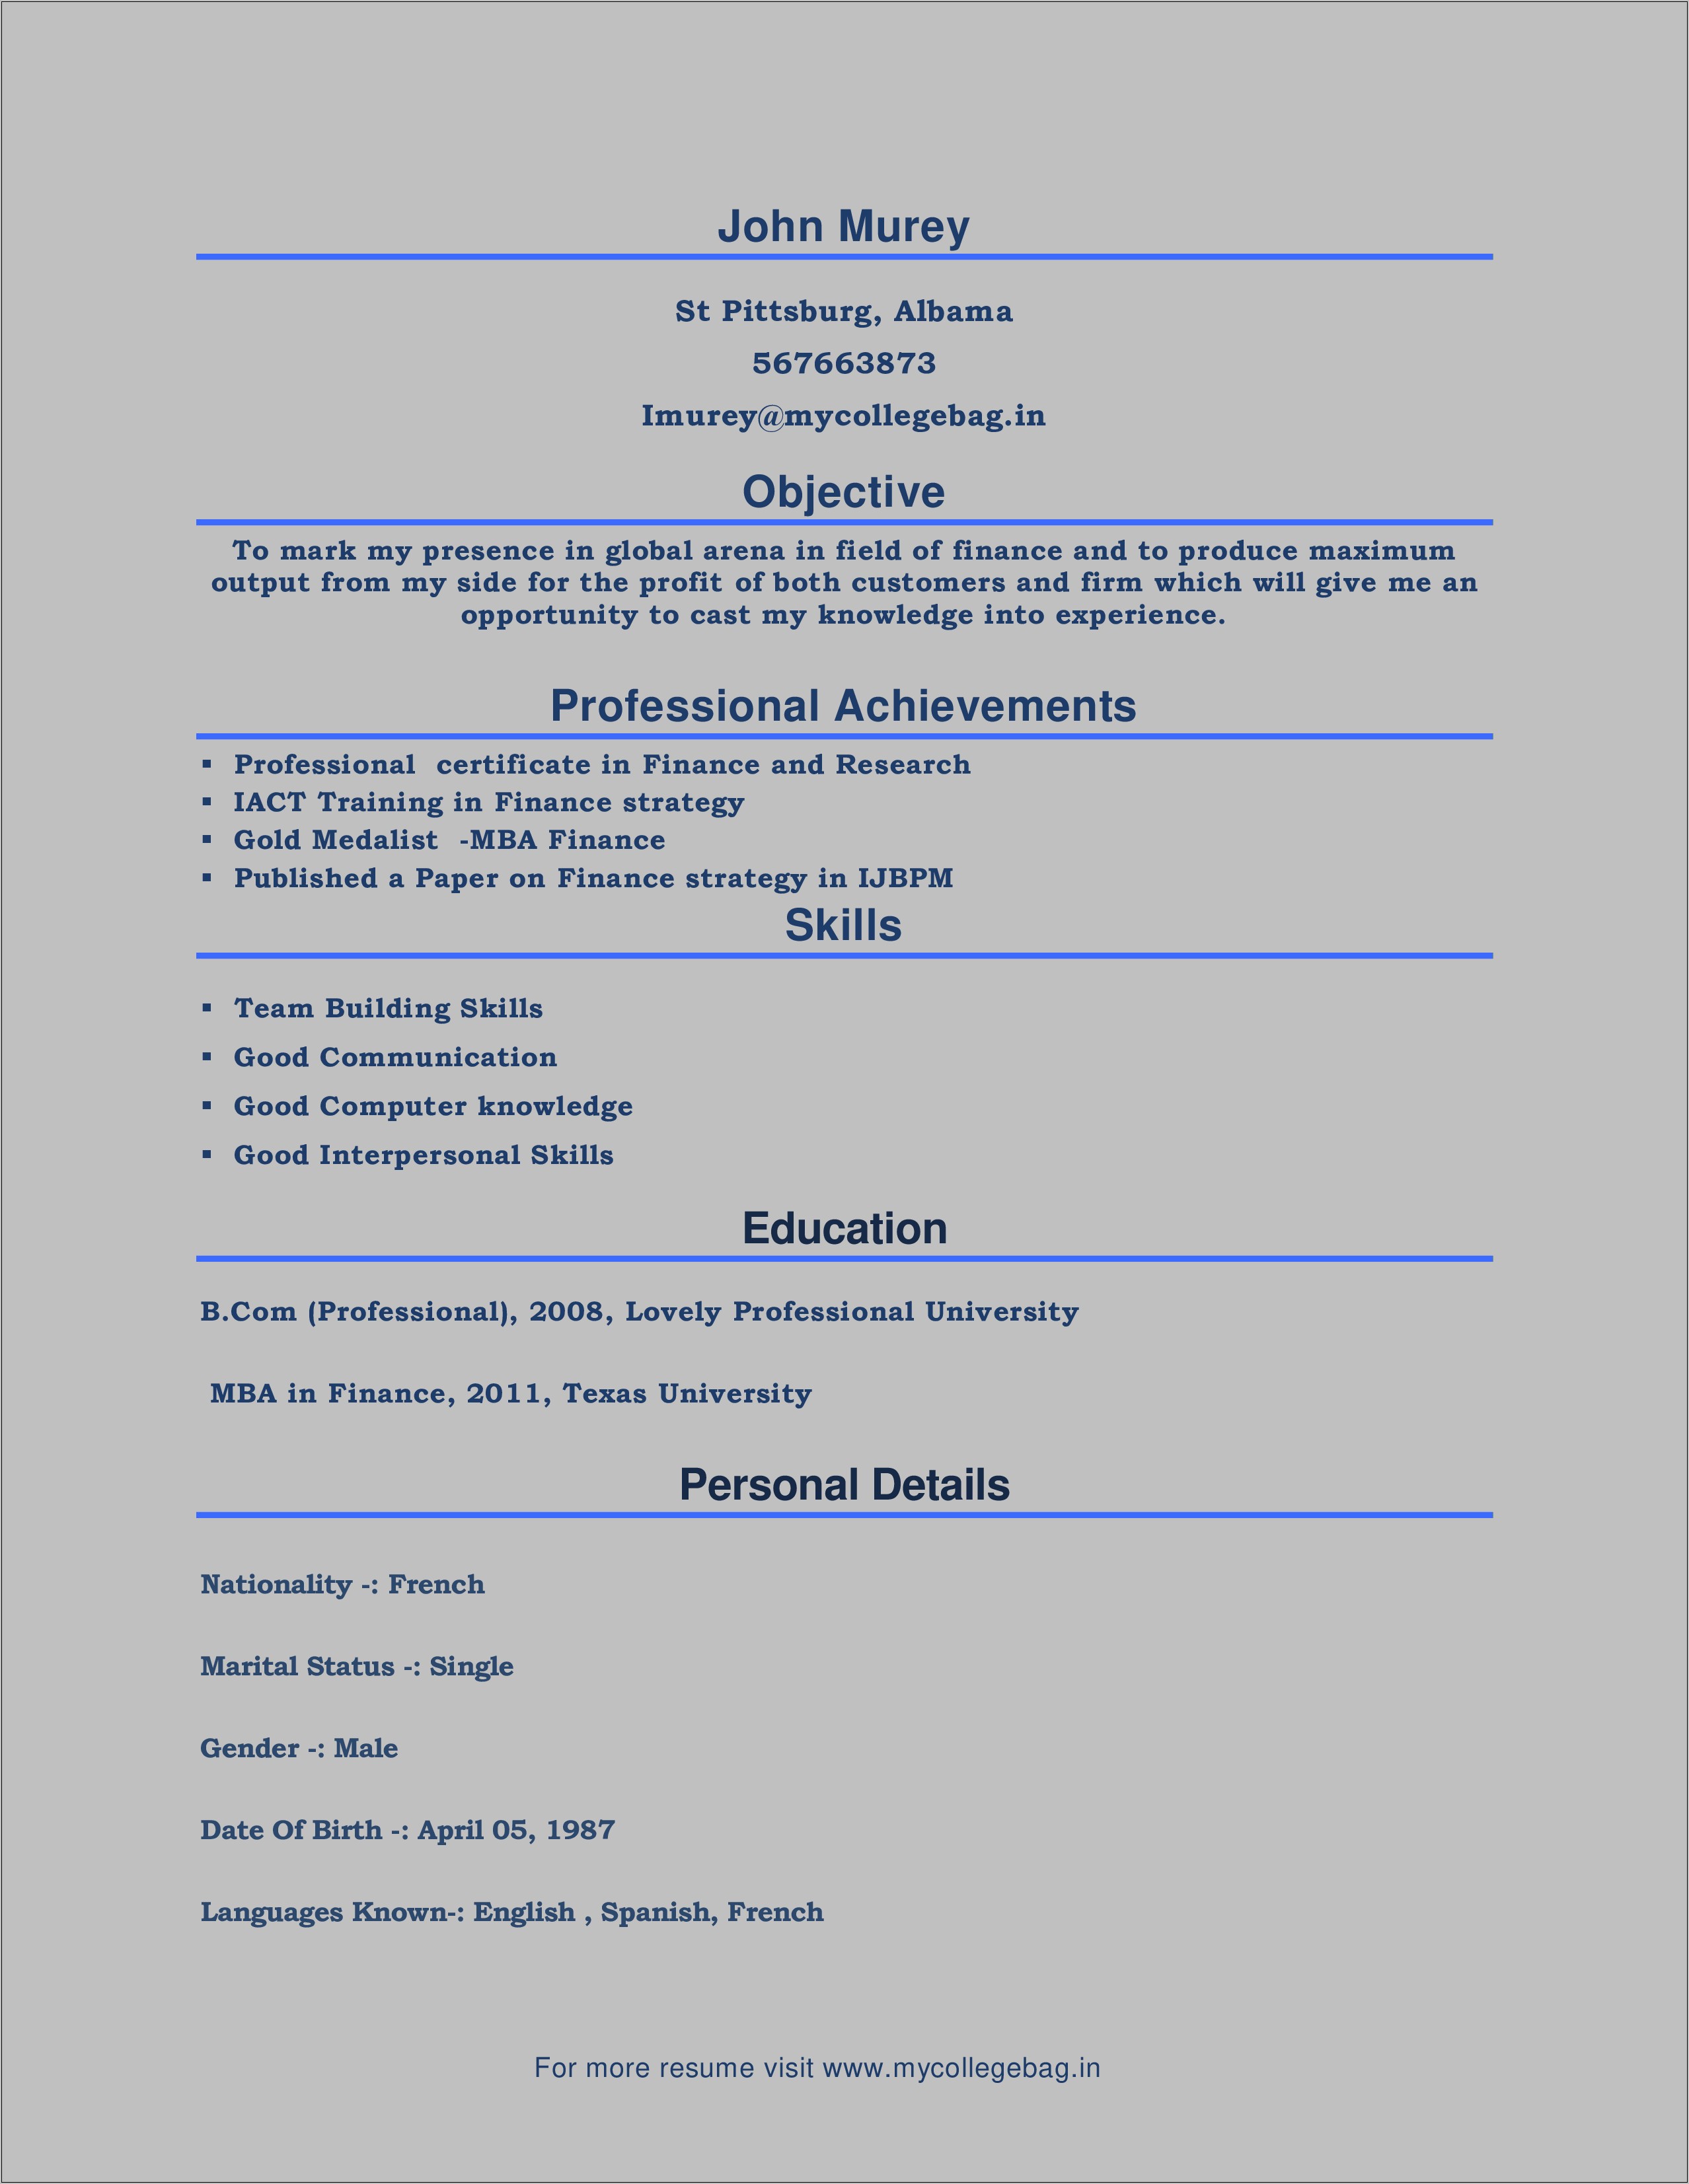 Resume Format For Mba Freshers Free Download